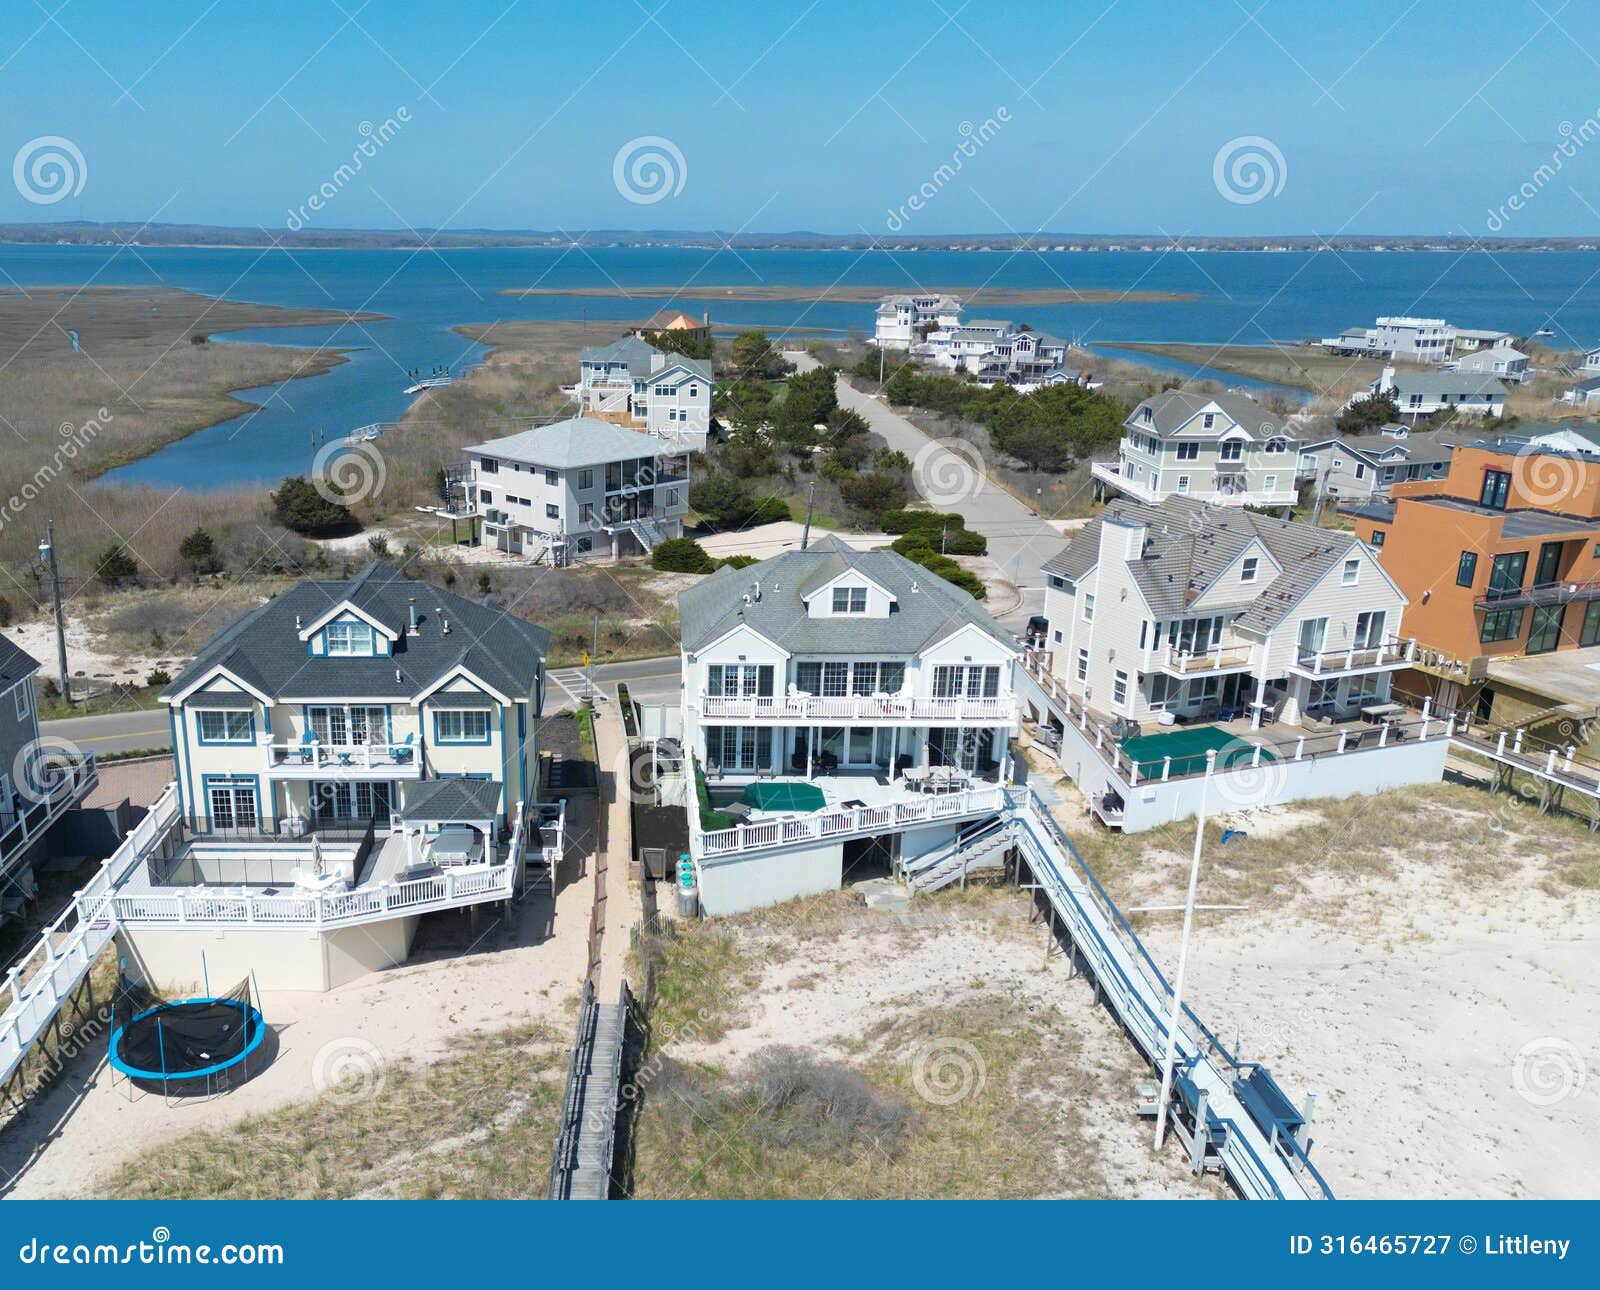 view of luxury homes along the beach in the hamptons long island new york